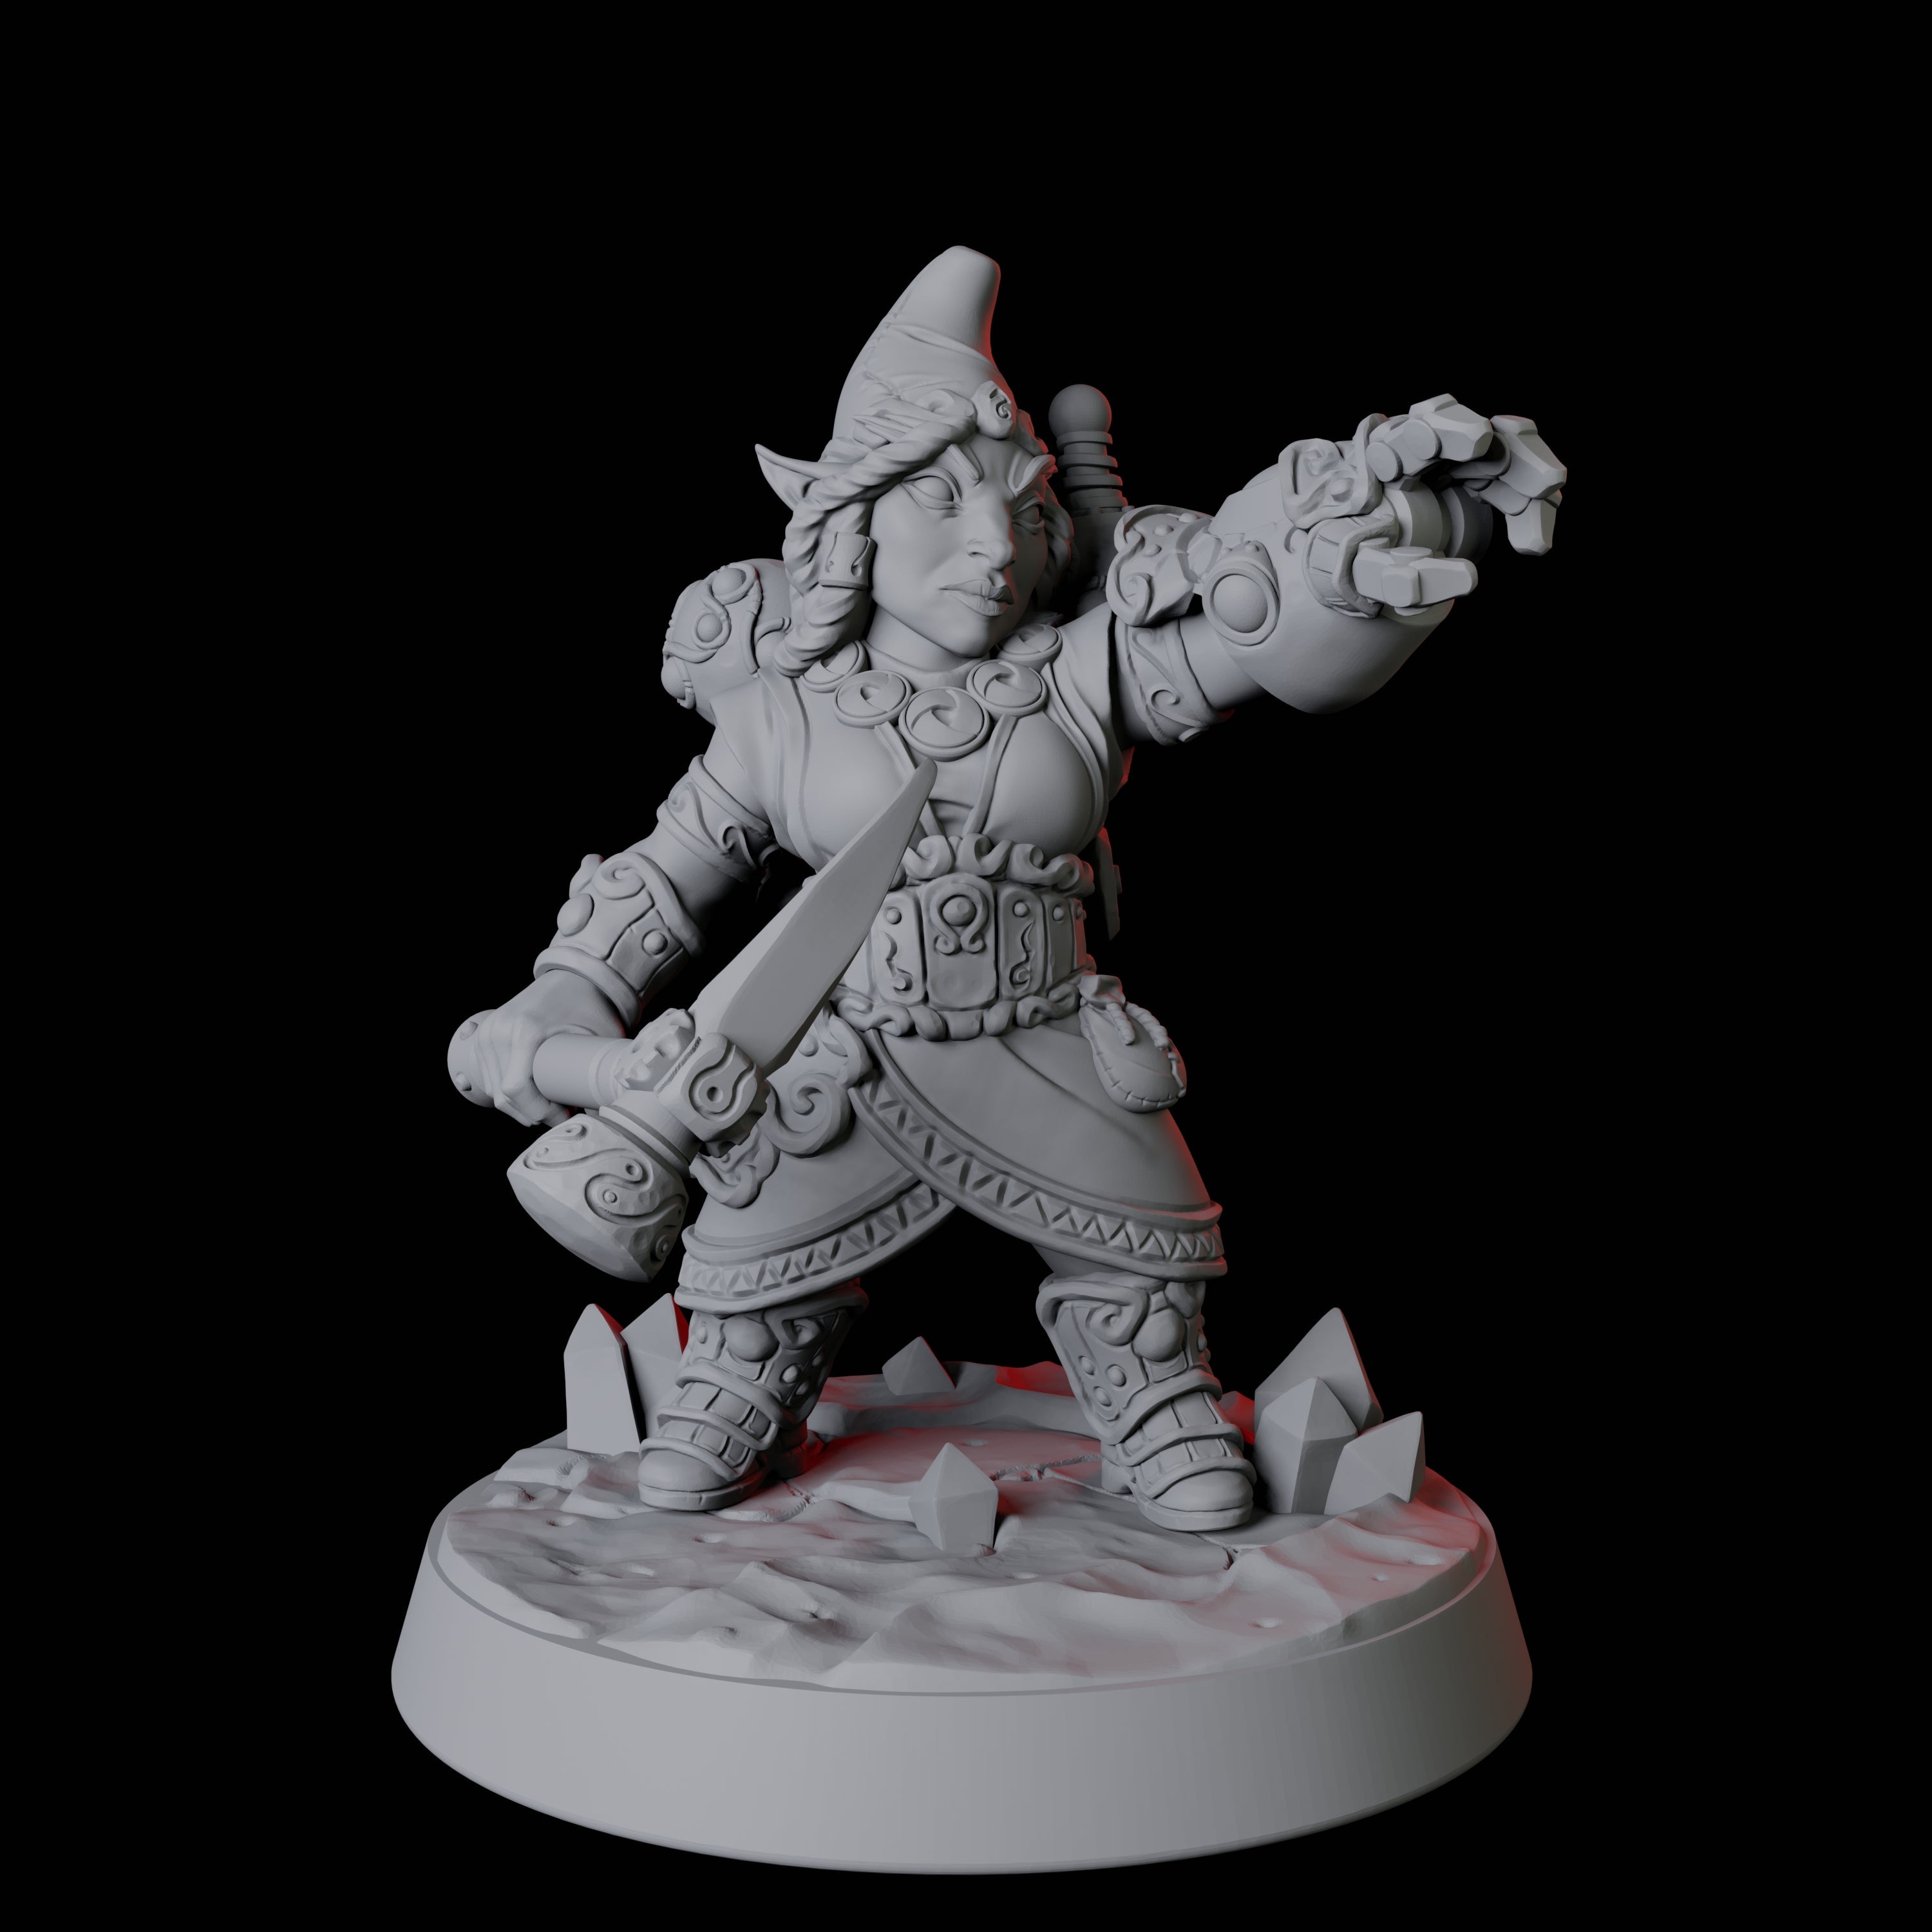 Deep Gnome Artificer D Miniature for Dungeons and Dragons, Pathfinder or other TTRPGs